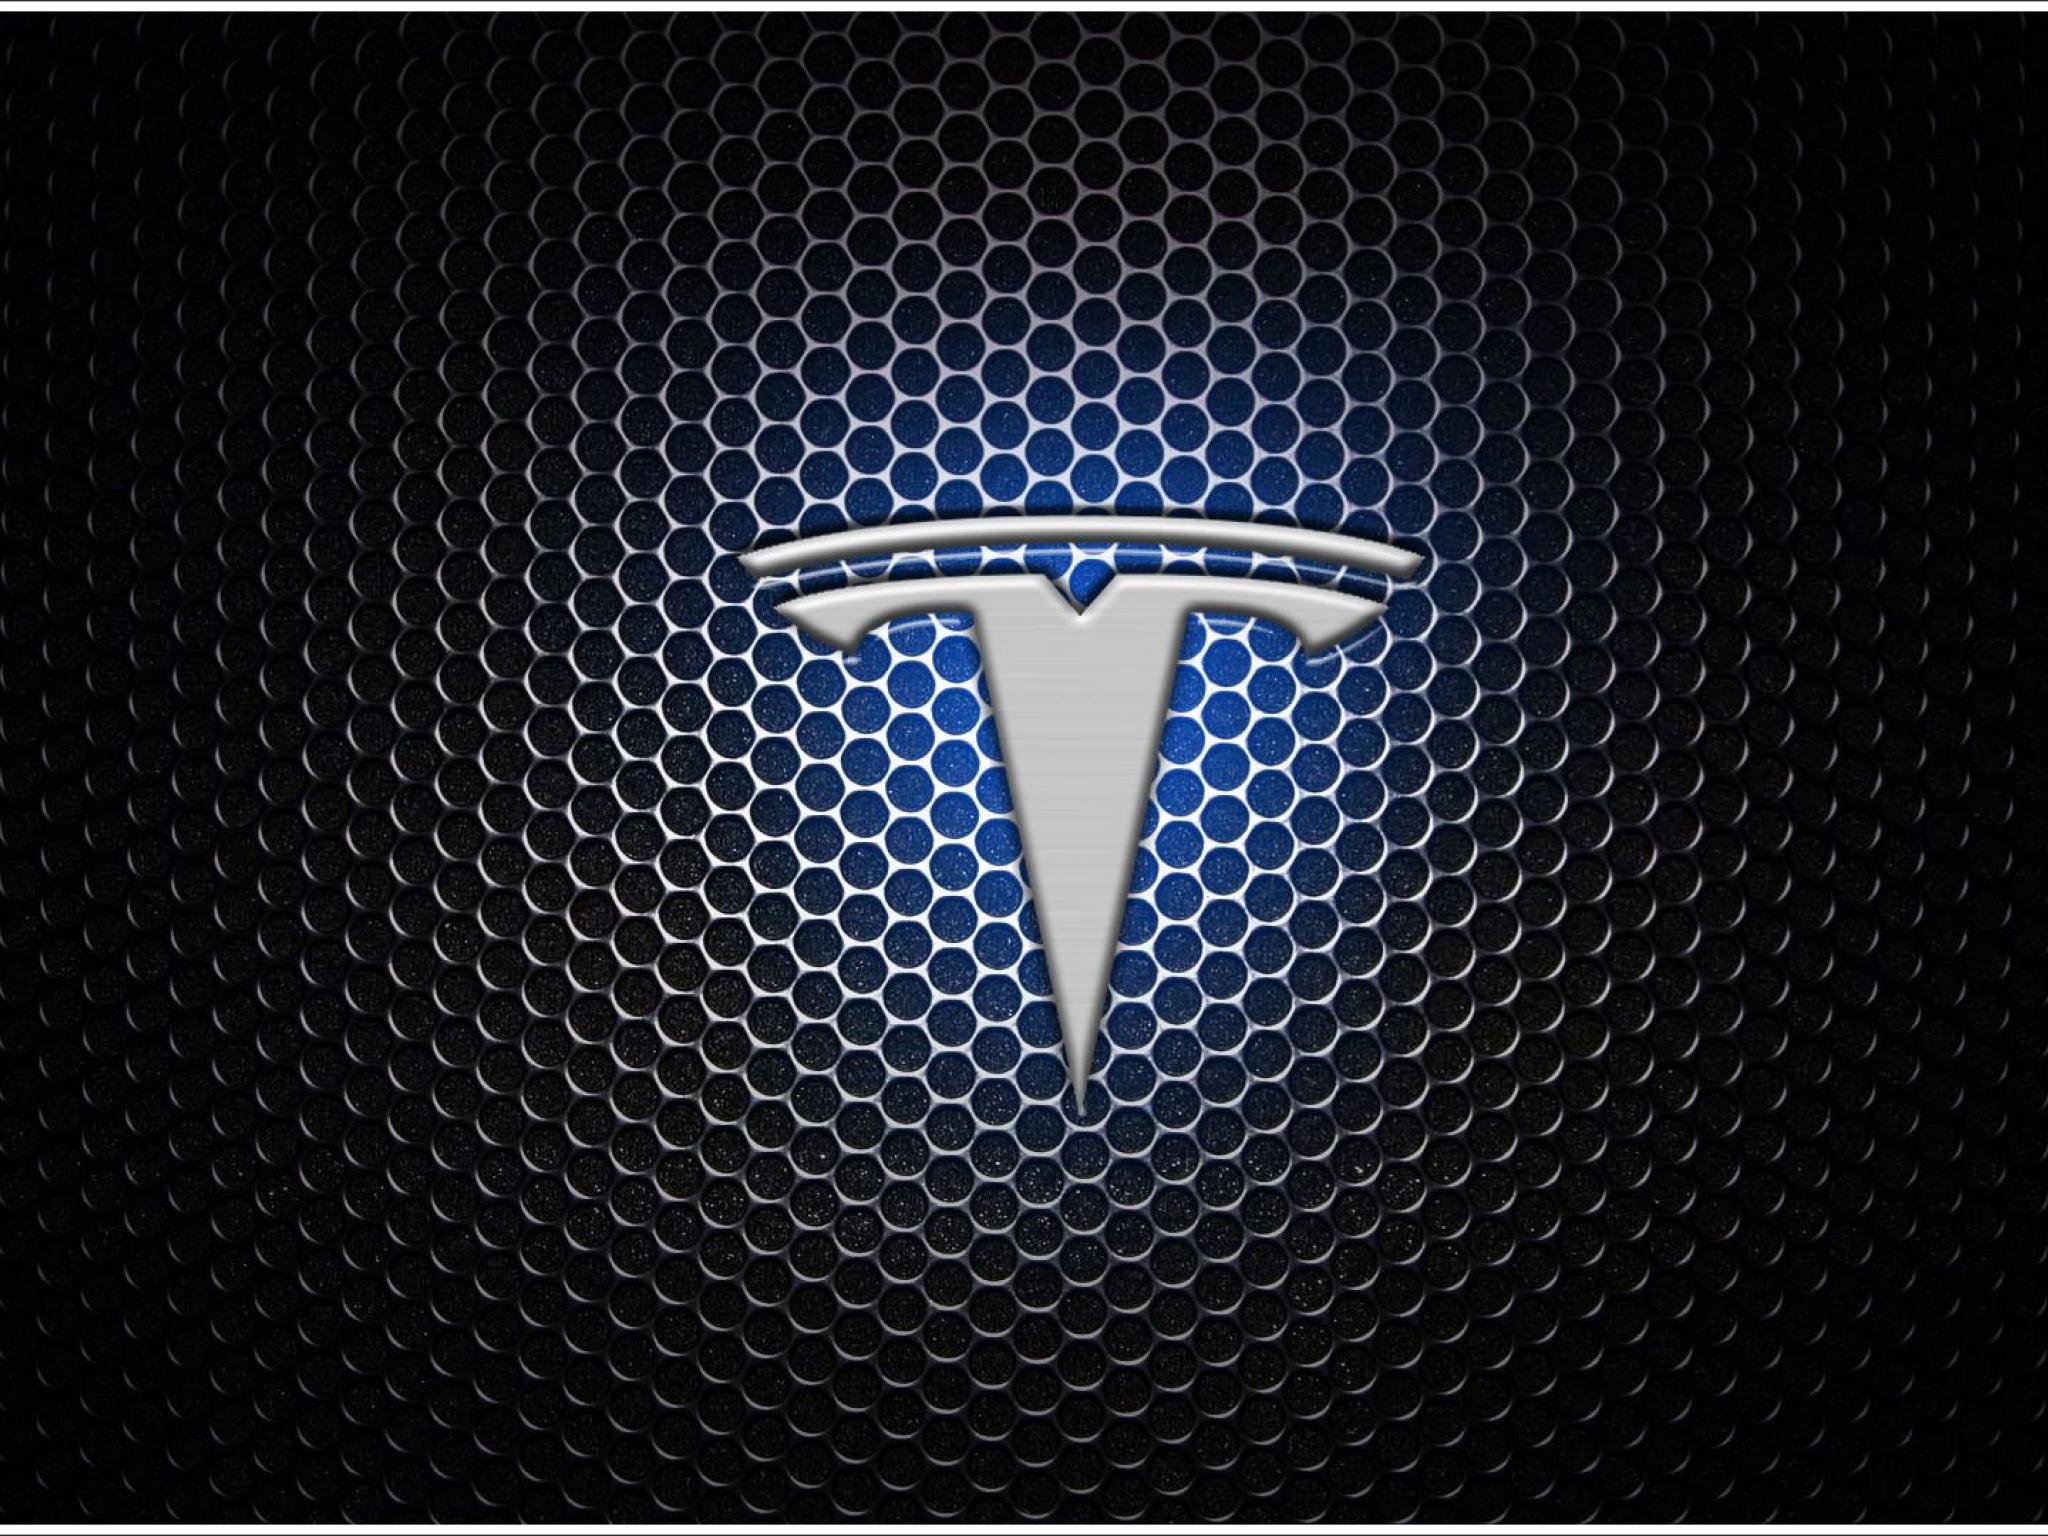  tesla-to-250-here-are-10-other-price-target-changes-for-thursday 